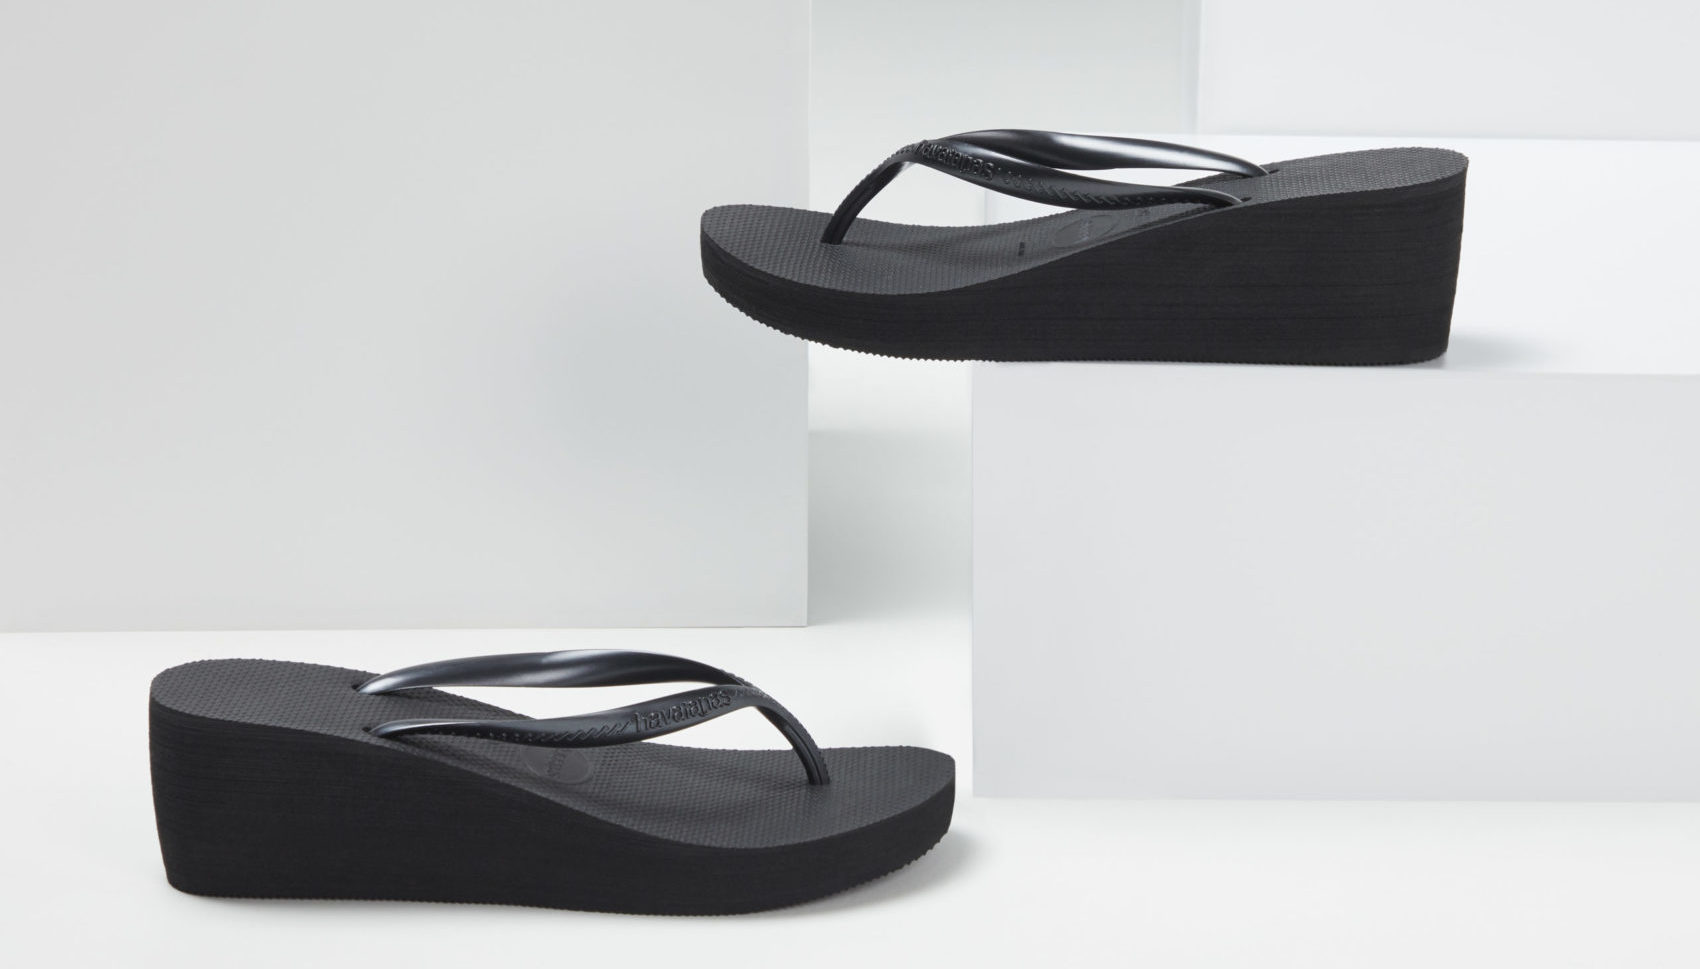 An elevated eCommerce Havaianas product image captured by I Heart Studios.